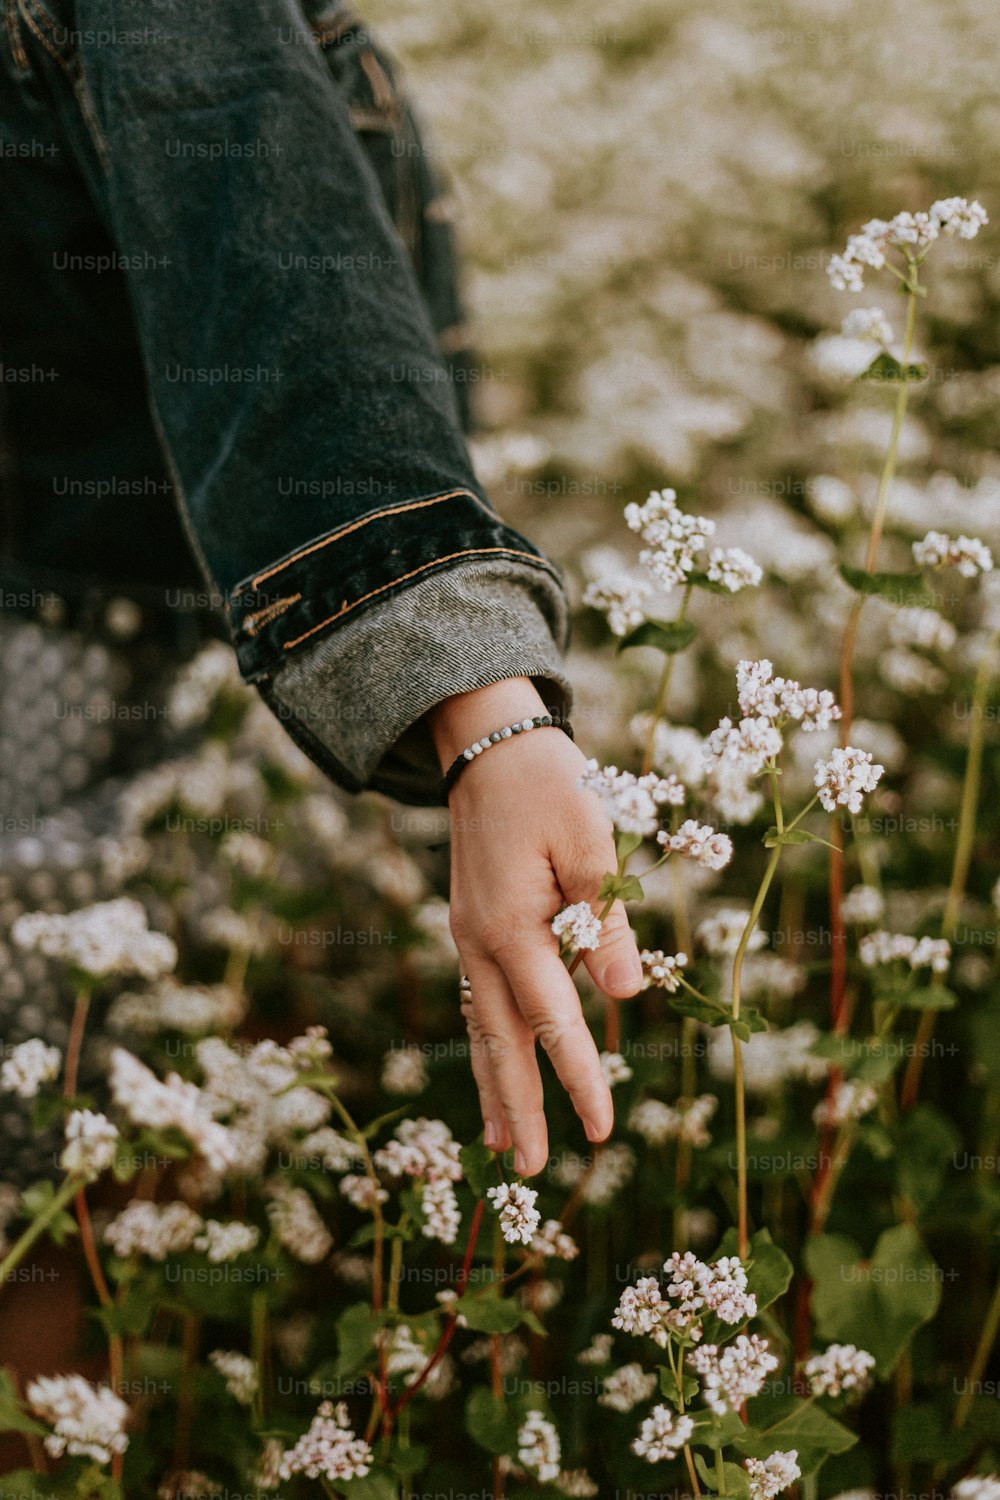 a pair of hands holding flowers